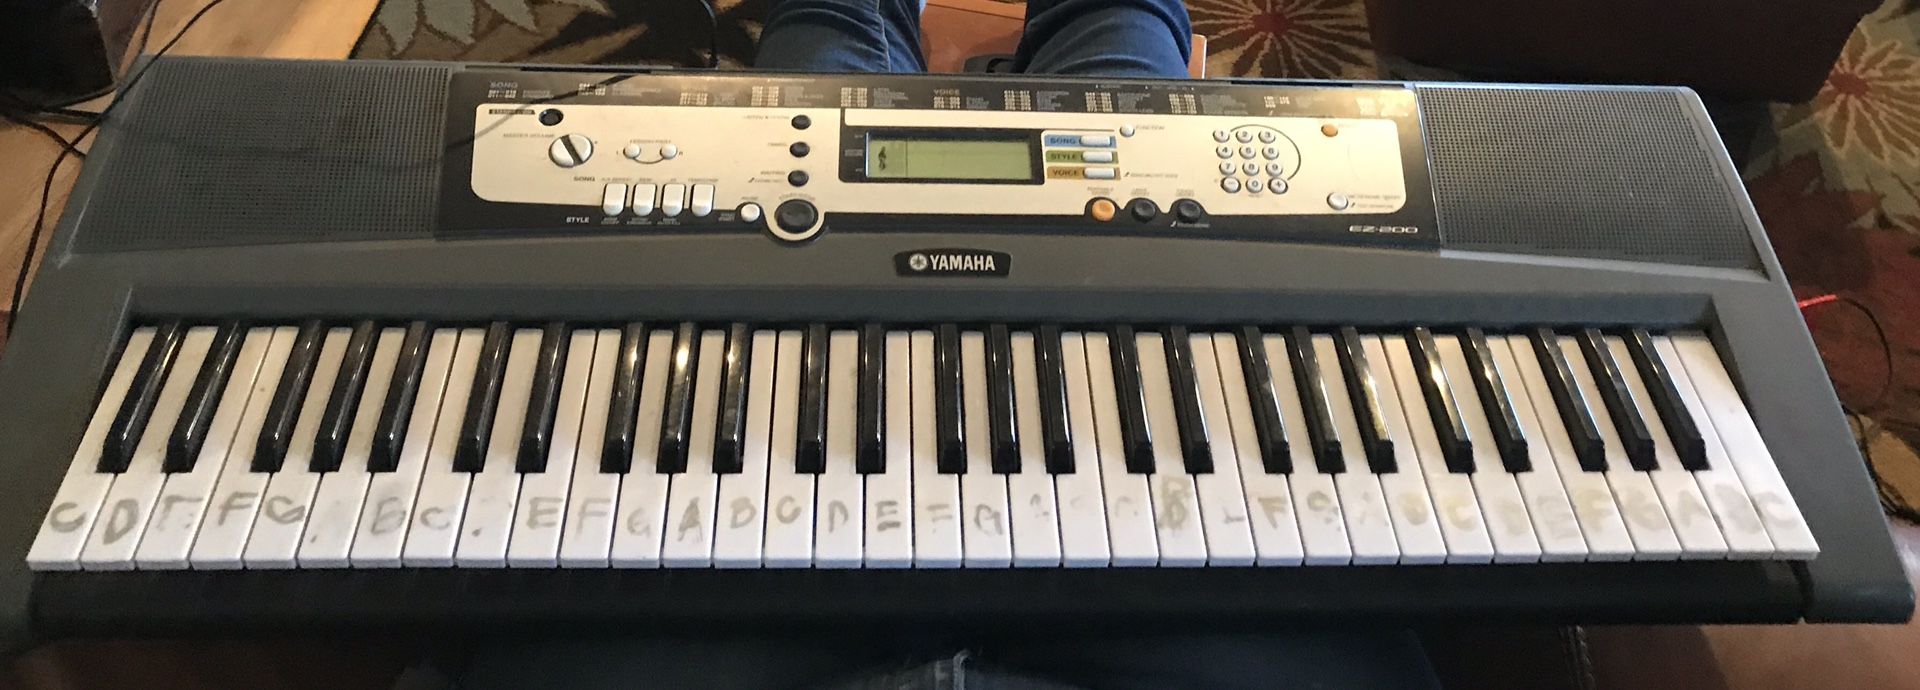 Lighted Yamaha learning keyboard First $70, gets it. Ez-200